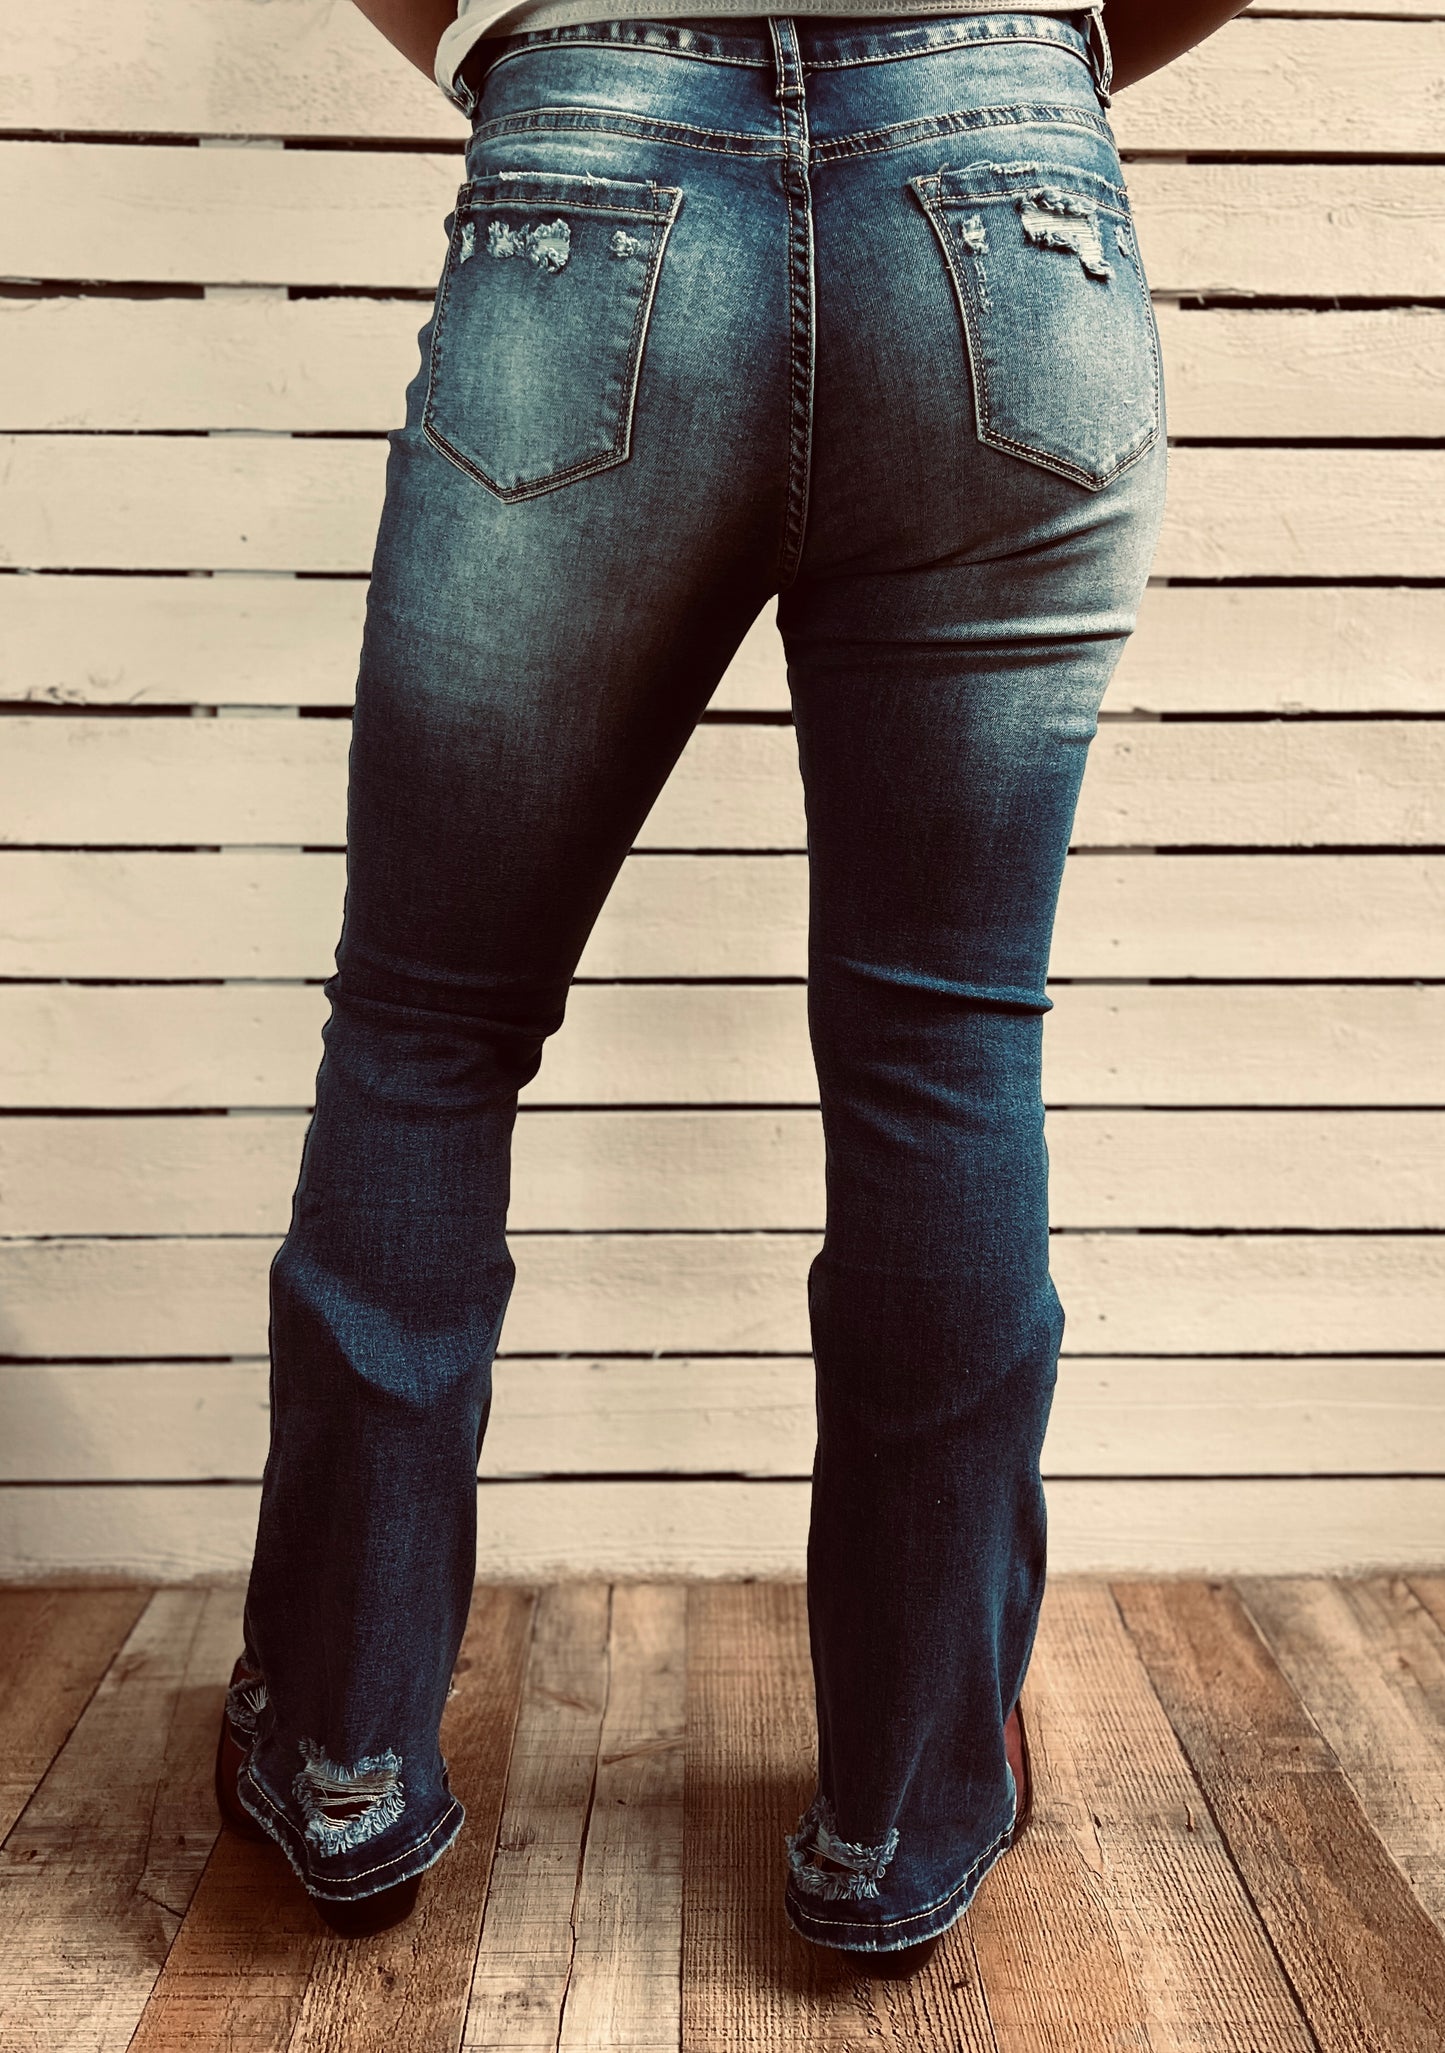 Blue Distressed Flare Jeans